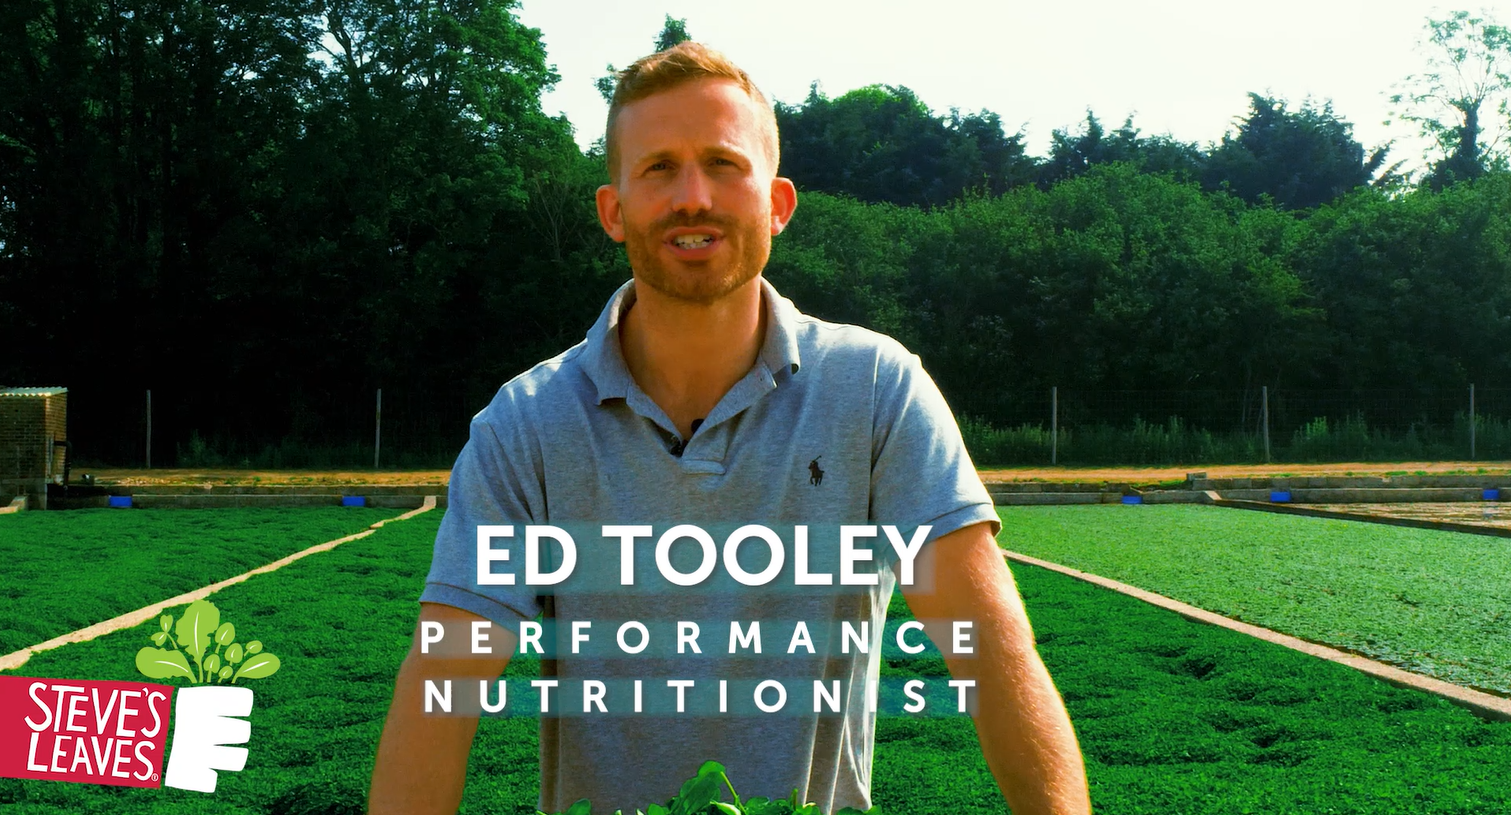 Steve’s Leaves launches new campaign, featuring nutritionist Ed Tooley